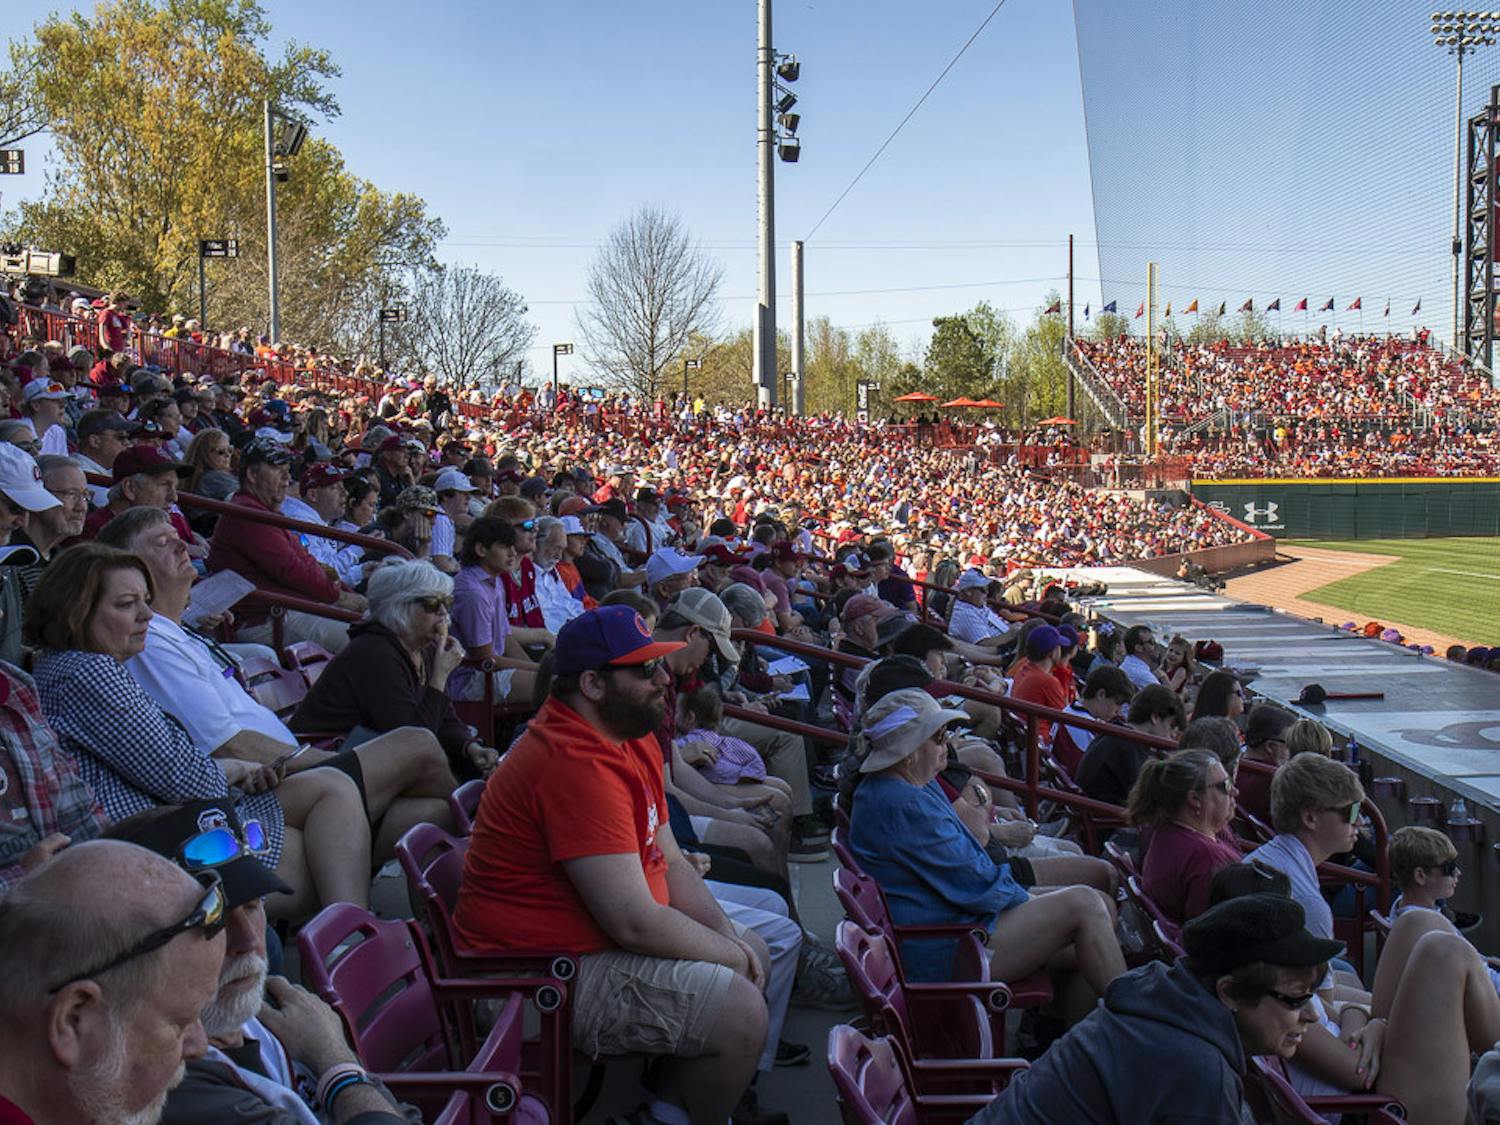 South Carolina and Clemson fans pack Founders park during the third game of the rival series on March 5, 2023. The Gamecocks beat the Tigers 7-1, winning 2-1 in the series.&nbsp;